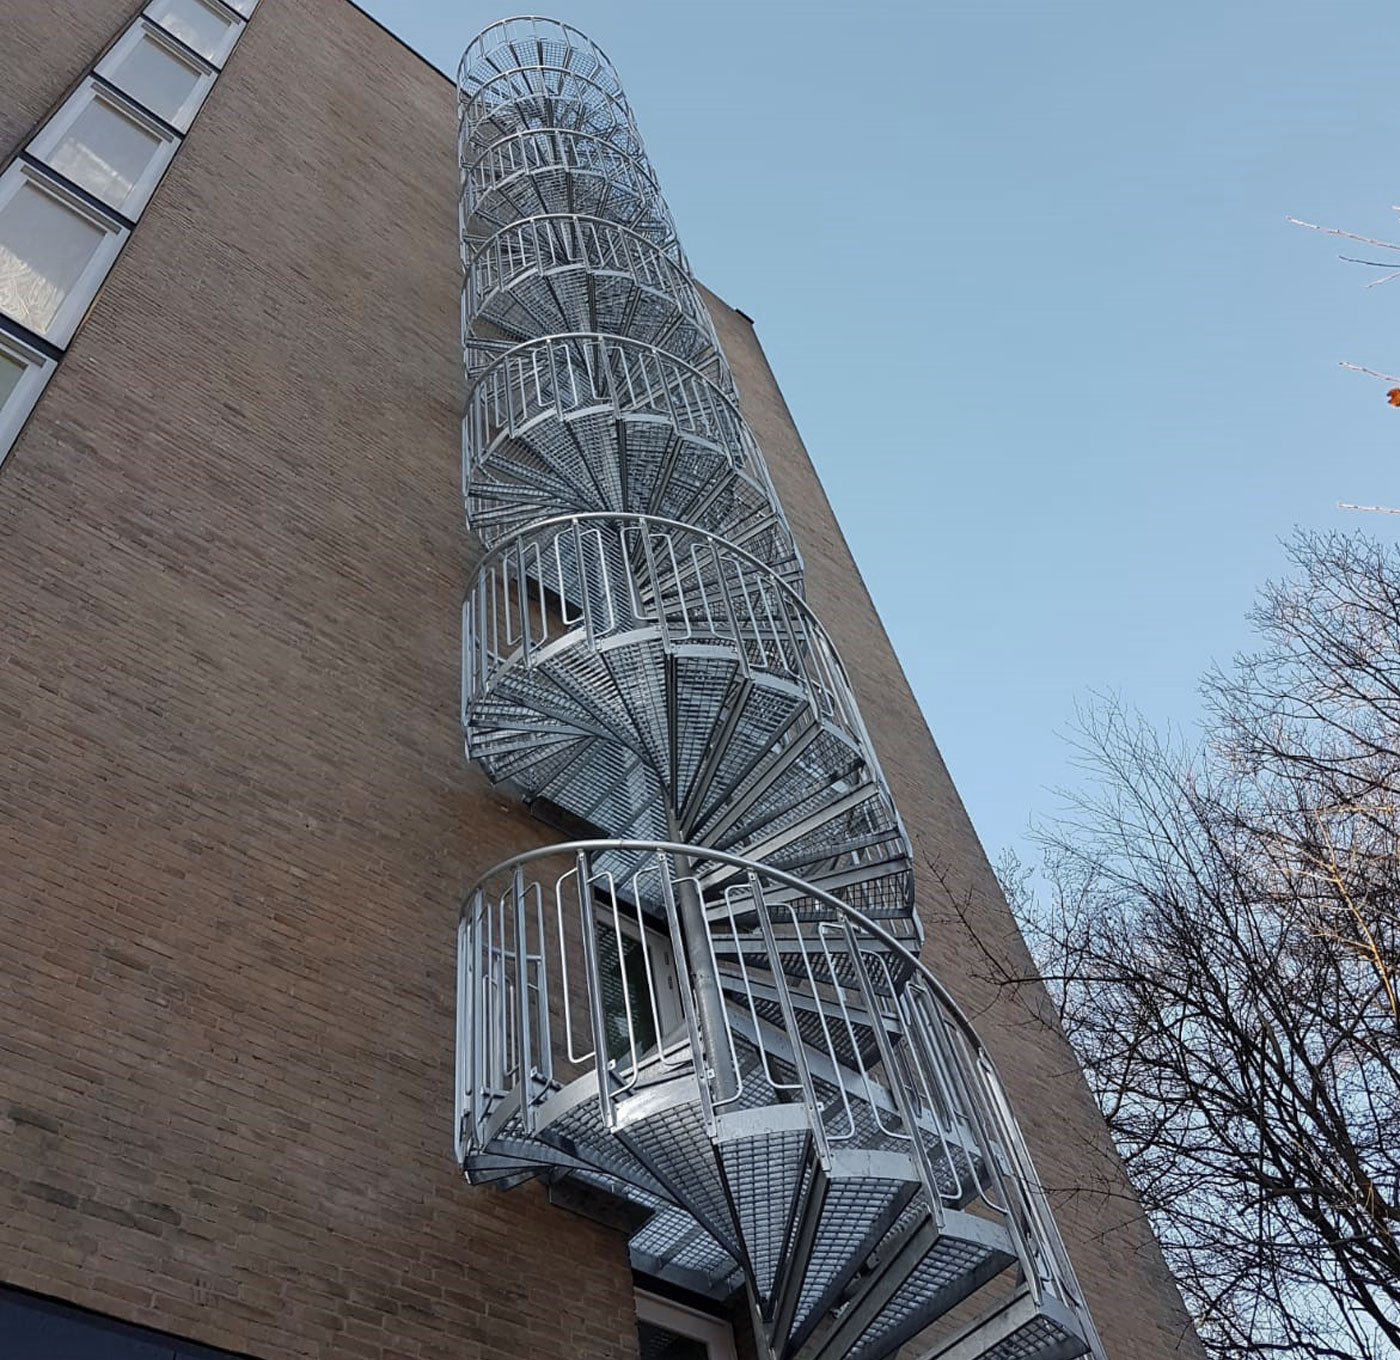 Spiral staircase outdoors with steps of grating and childsafe railing